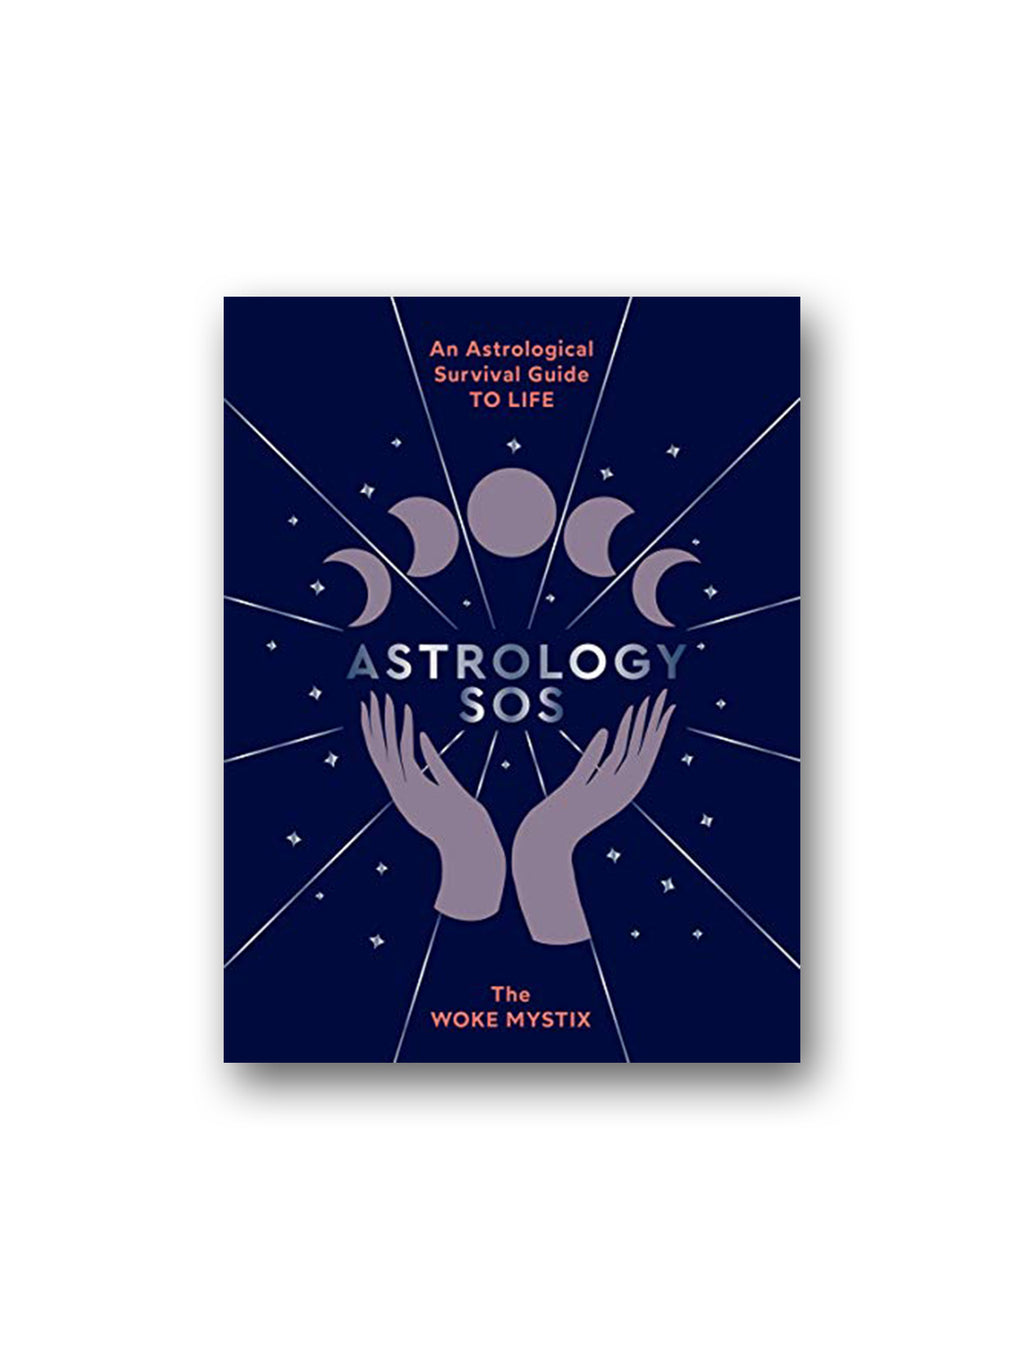 Astrology SOS : An Astrological Survival Guide to Life